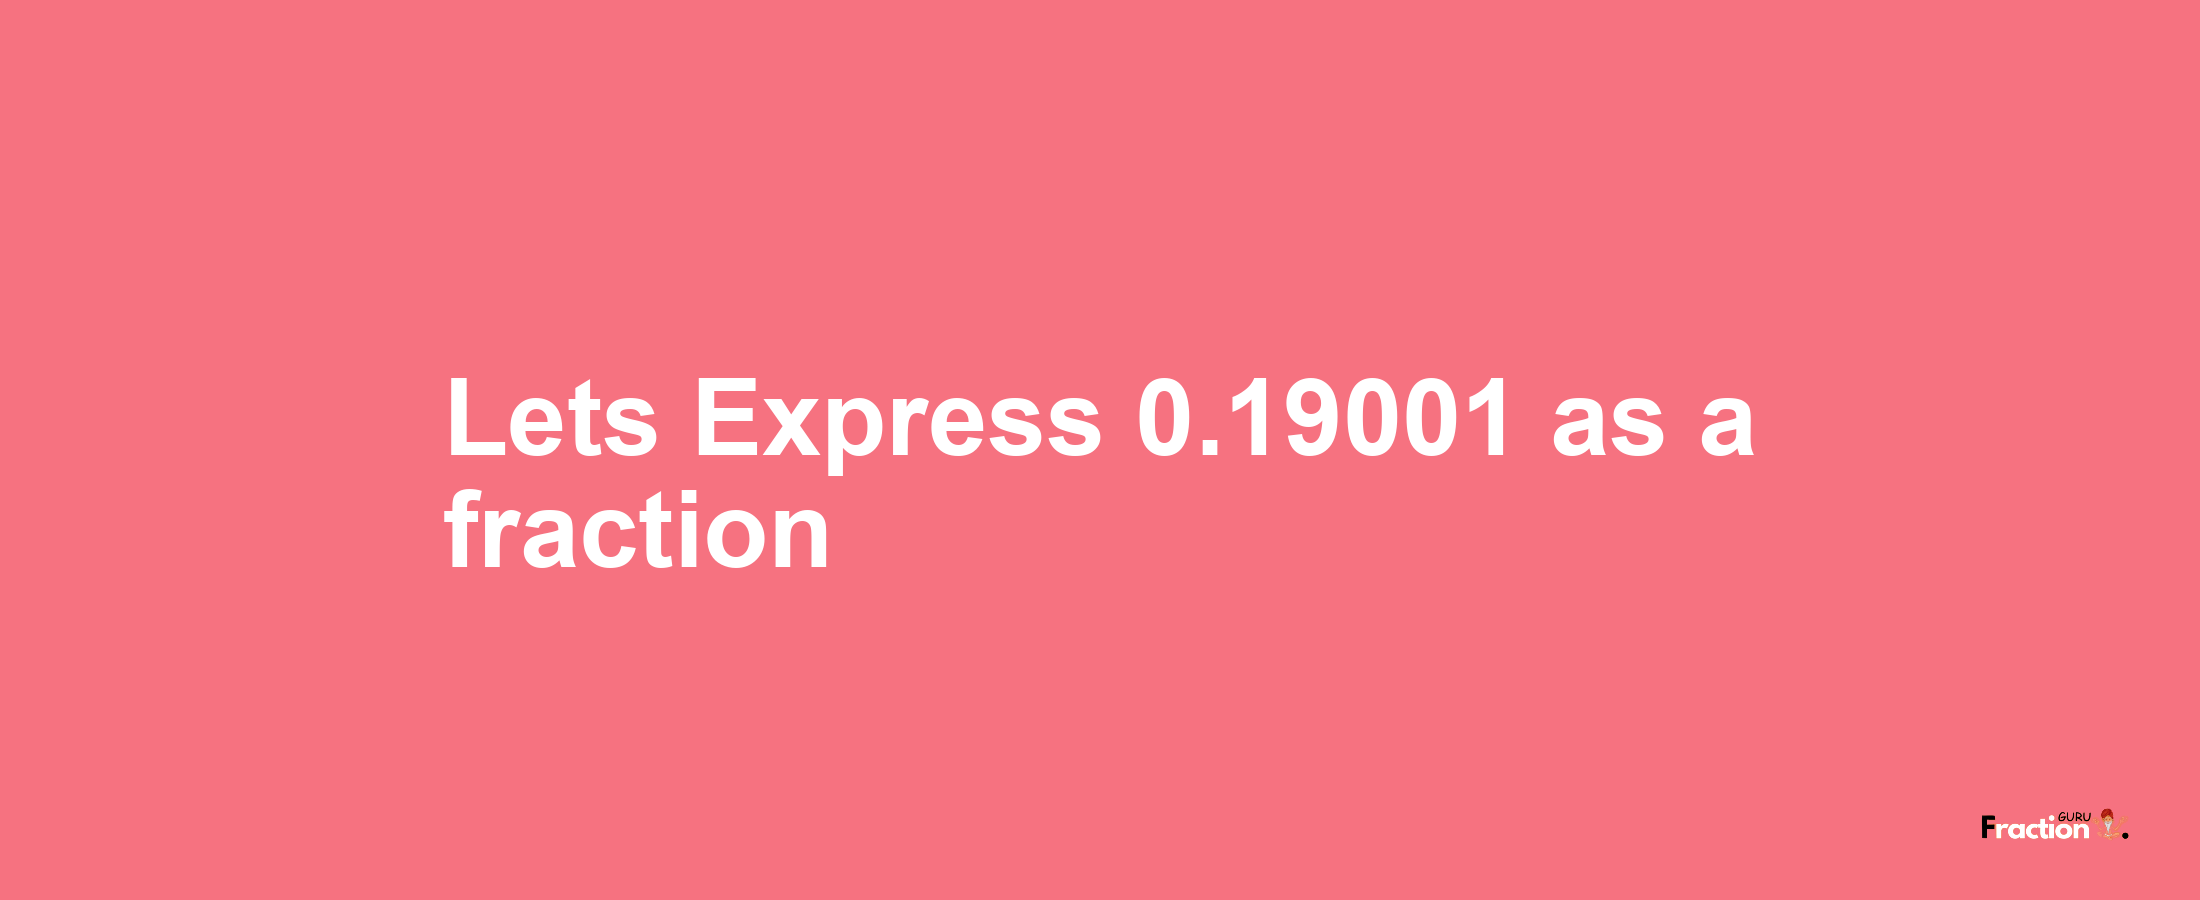 Lets Express 0.19001 as afraction